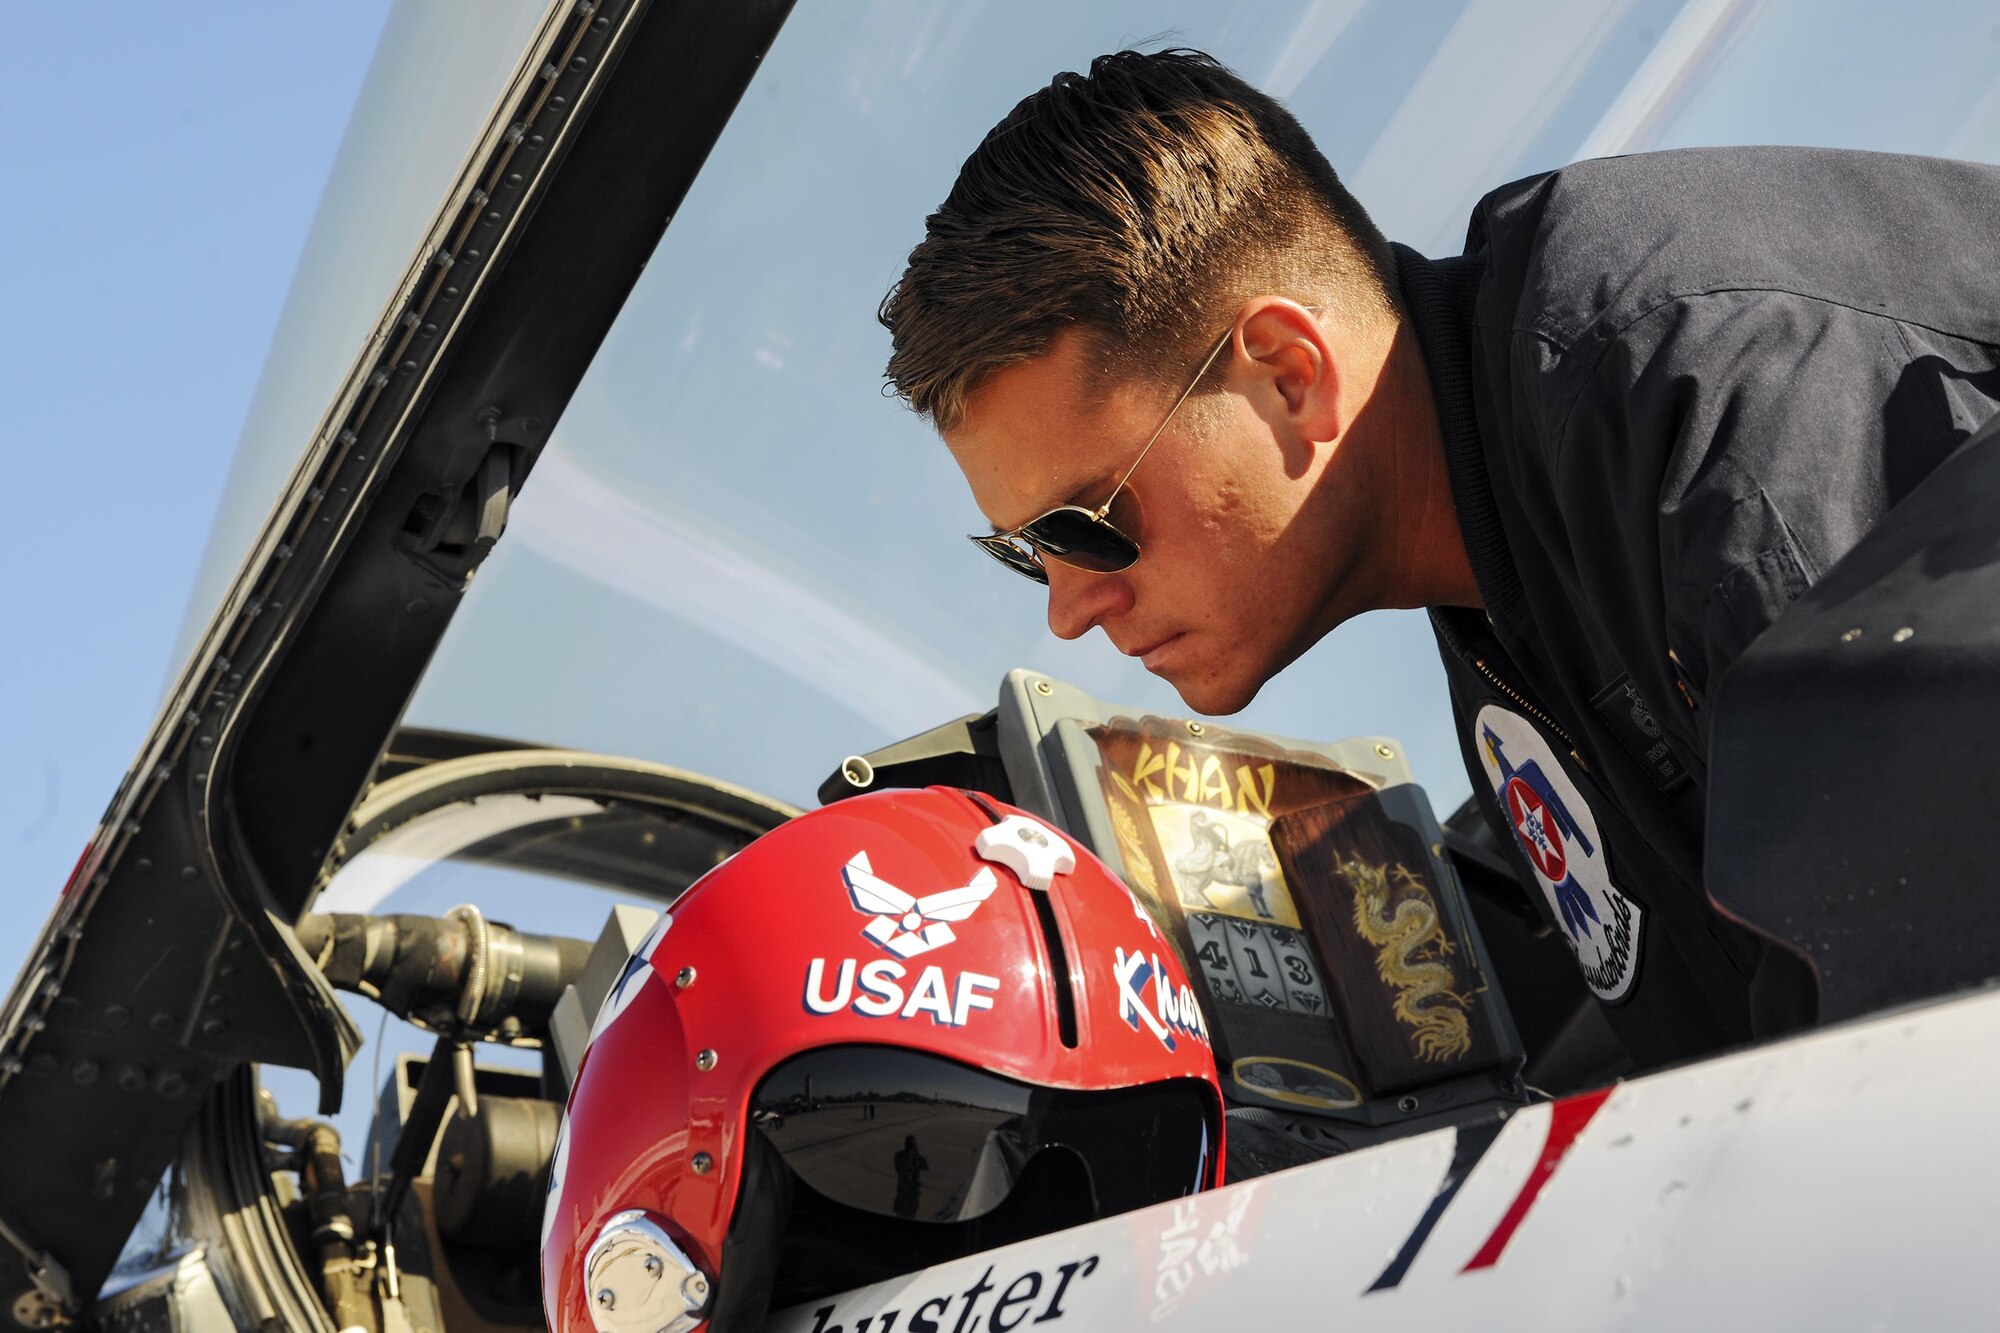 Staff Sgt. Bryson Schuster, U.S. Air Force Thunderbirds avionics technician, inspects the cockpit of a F-16C Fighting Falcon during the Thunder Over South Georgia Air Show, Oct. 29,2017 at Moody Air Force Base, Ga. Thunder Over South Georgia is part of the Air Force’s 70th Air Force Birthday celebration demonstrating air and space power over the ages. (U.S. Air Force photo by Airman Eugene Oliver)